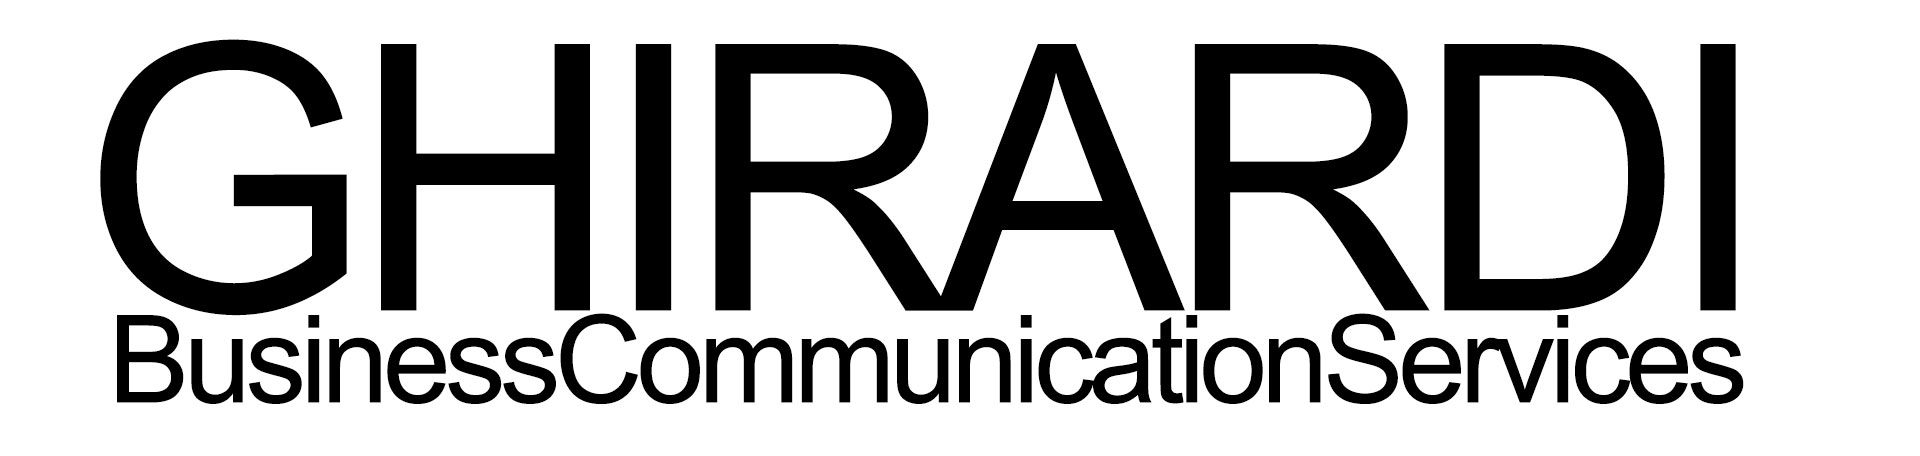 Ghirardi Business Communication Services